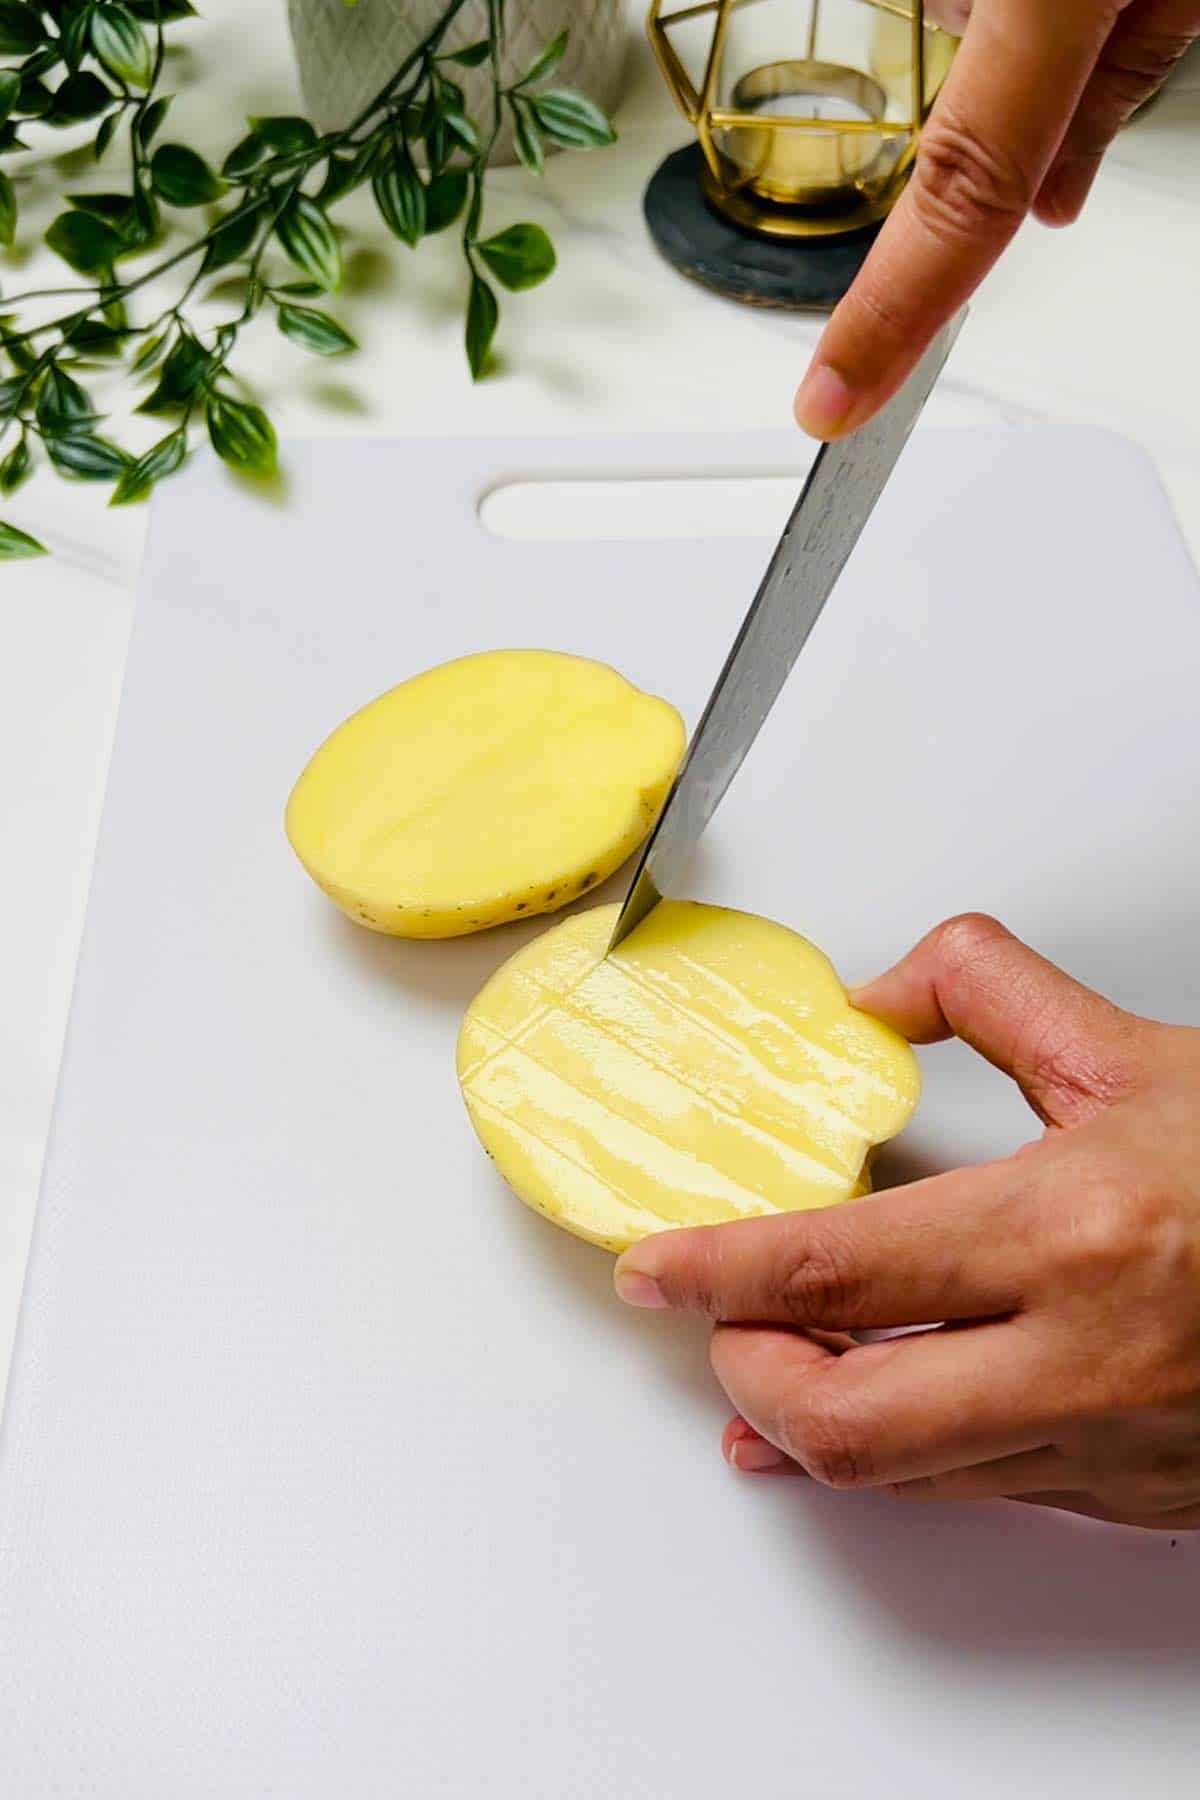 making a criss cross pattern on potatoes with a knife